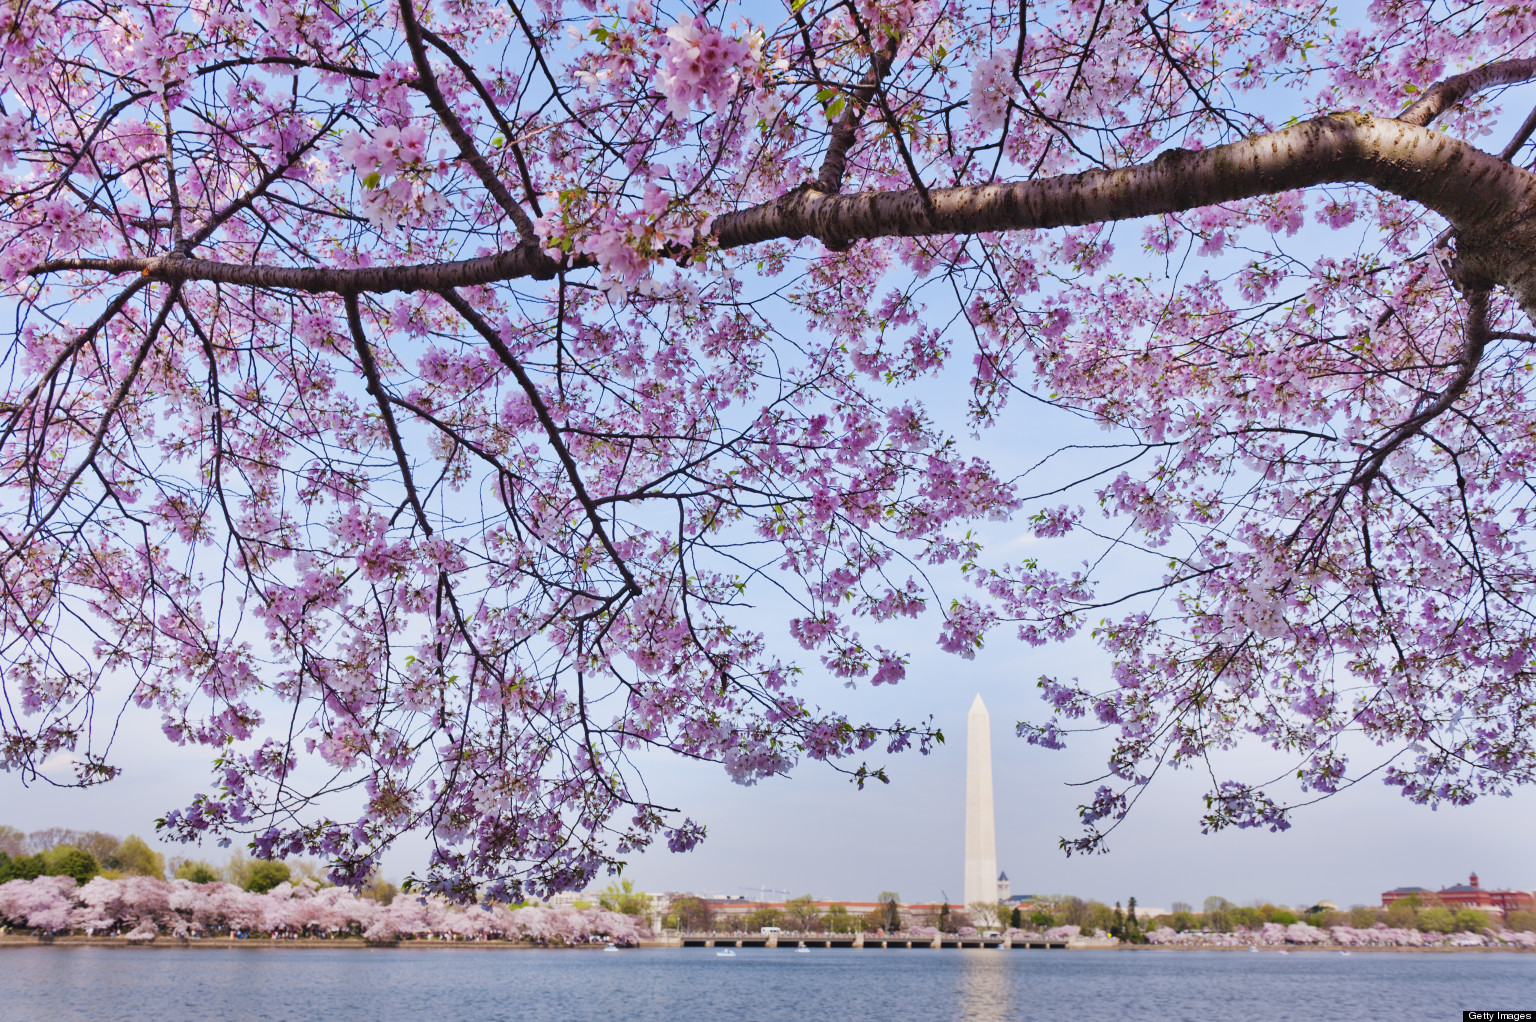 Cherry Blossom Peak Bloom Changed: Blossoms Expected April 3-6 | HuffPost